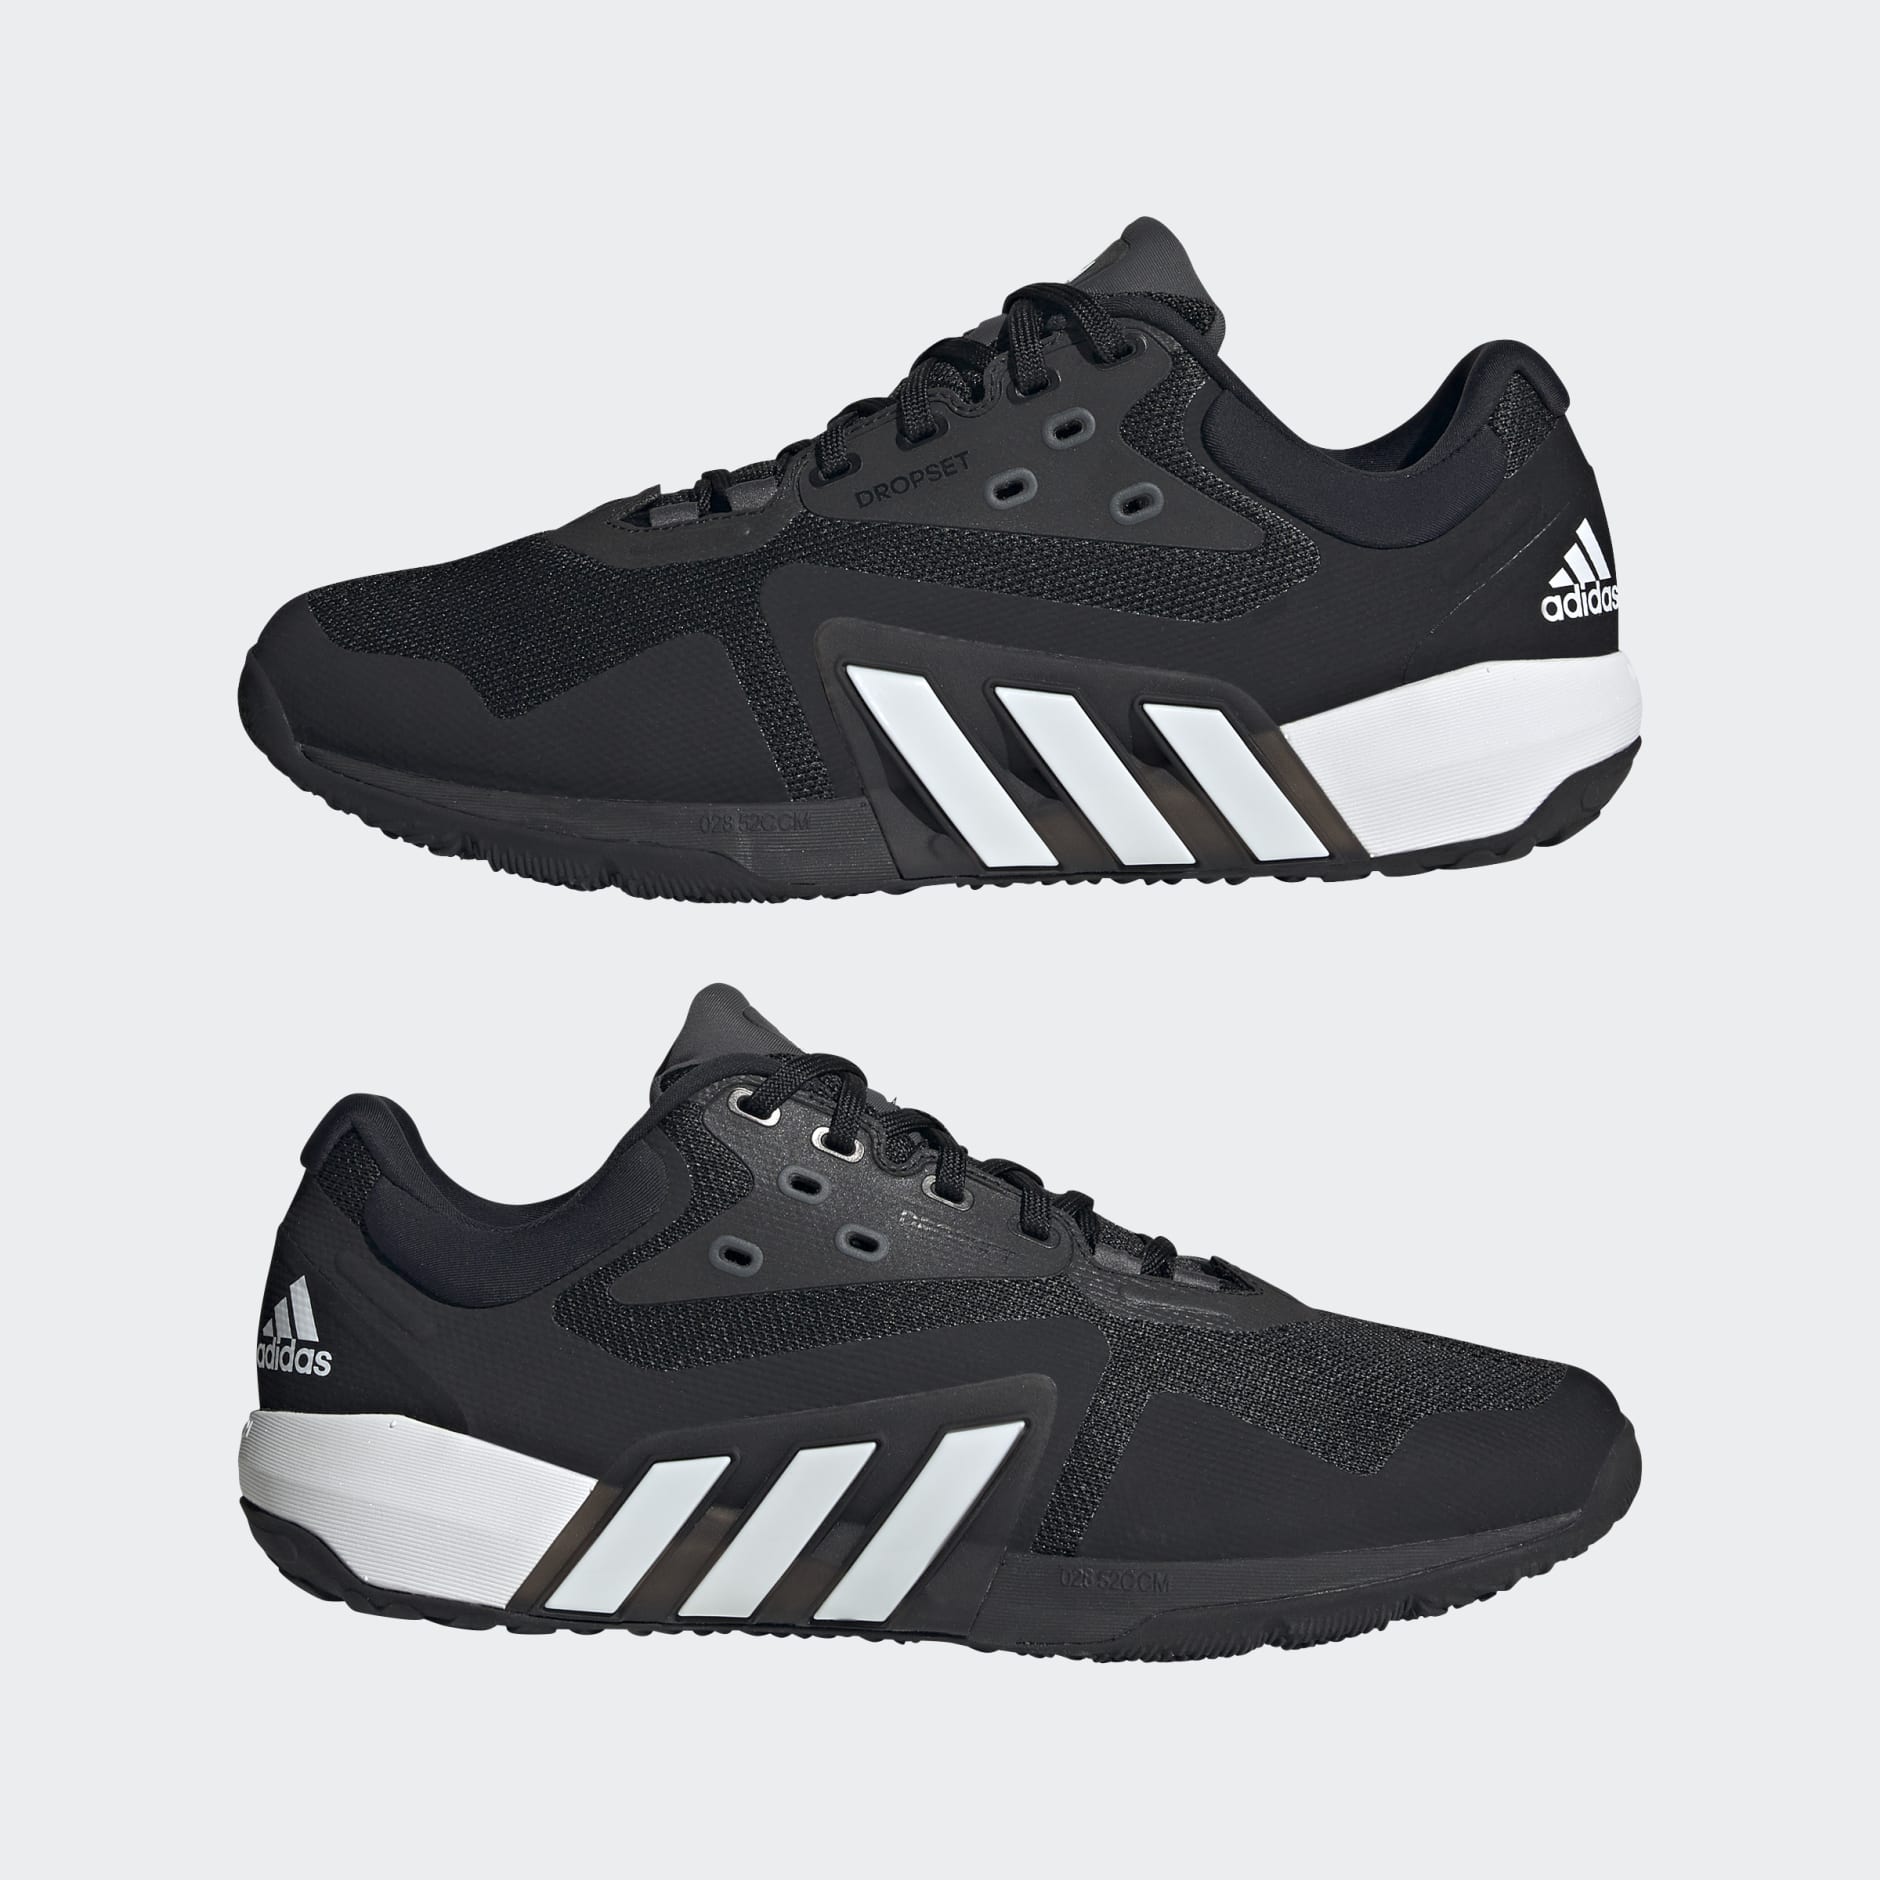 Click now to browse Authentic Guaranteed Adidas Dropset Trainer GW3905 ...